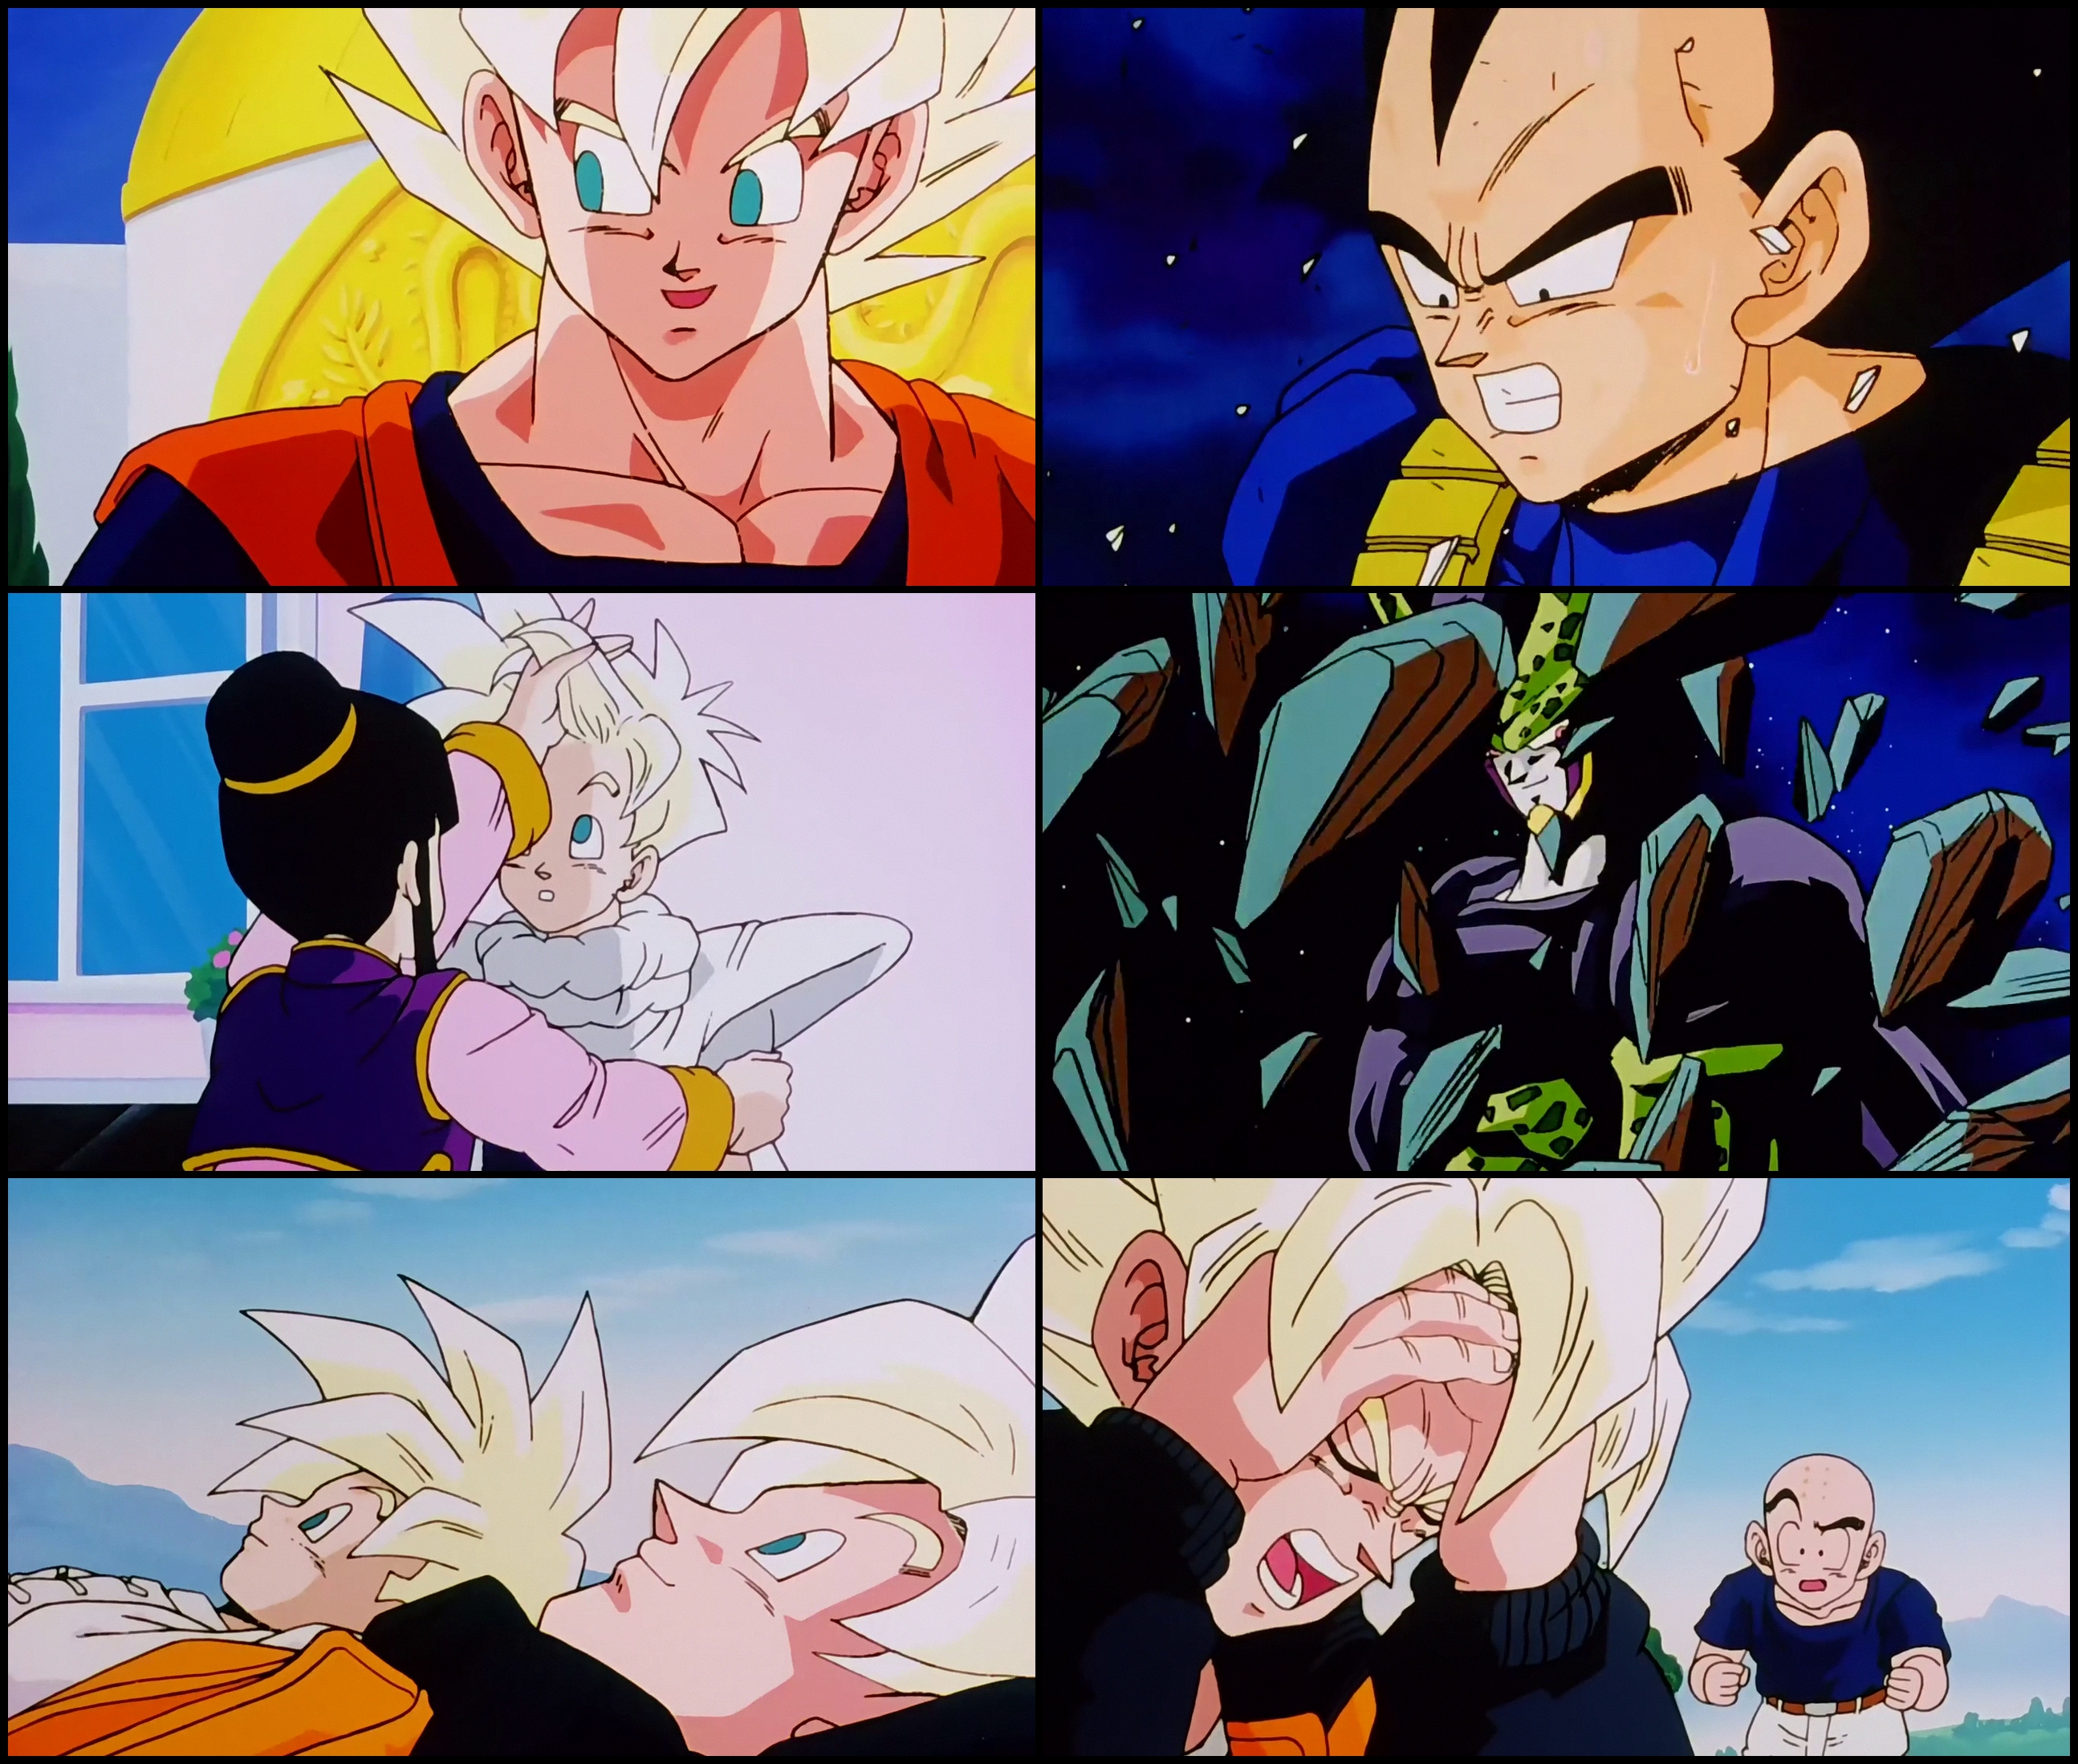 Dragon Ball Z Ep 265 (1) by gisel179620 on DeviantArt